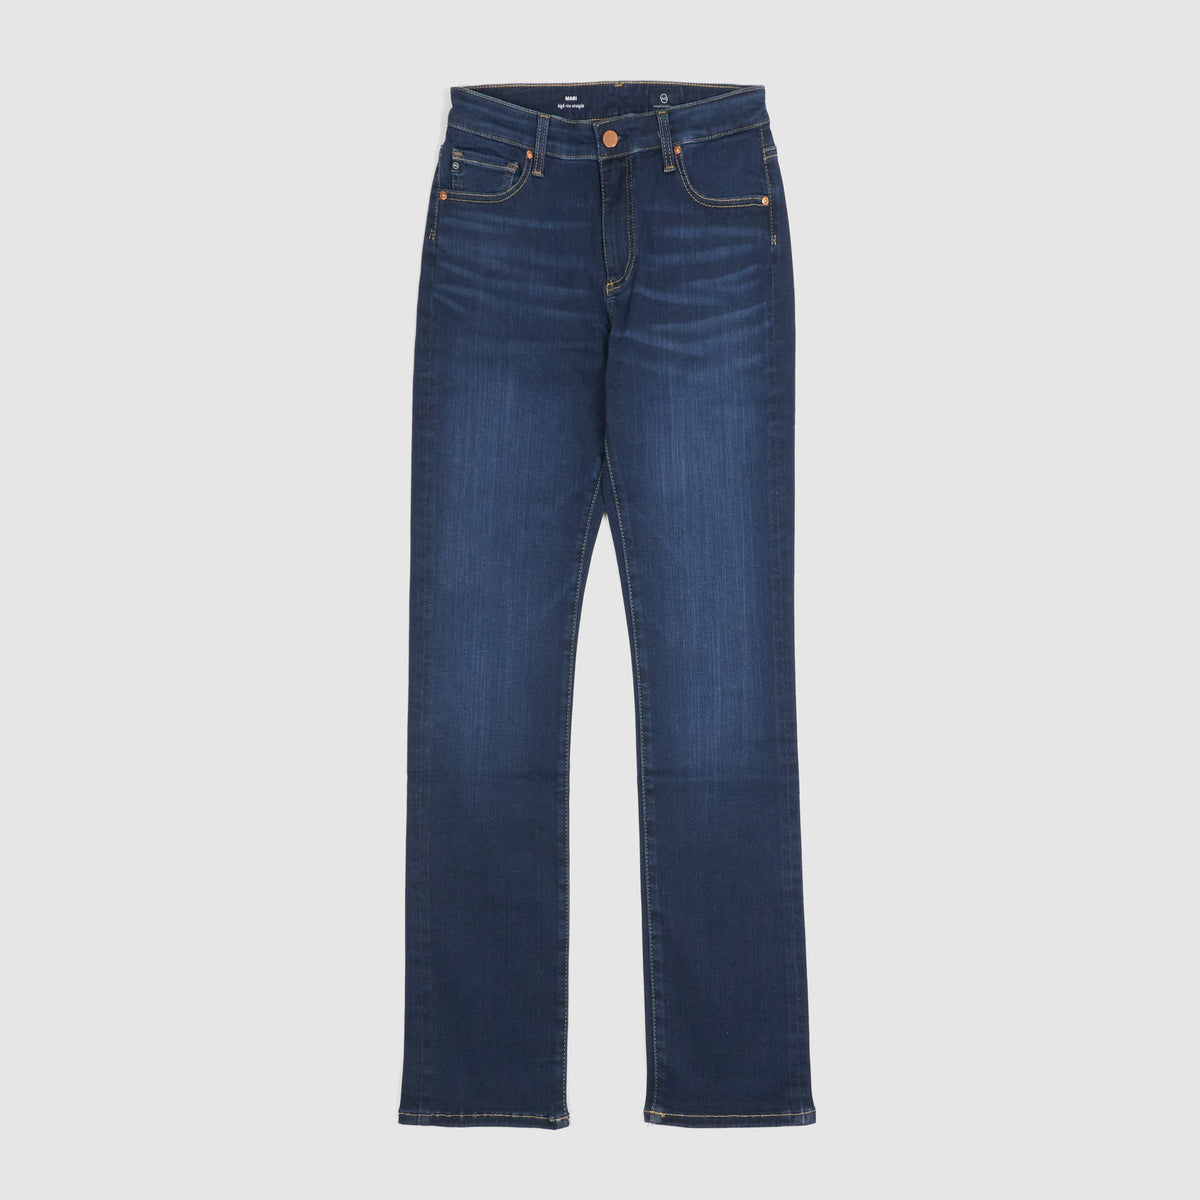 Adriano Goldschmied Ladies Mari High Rise Jeans